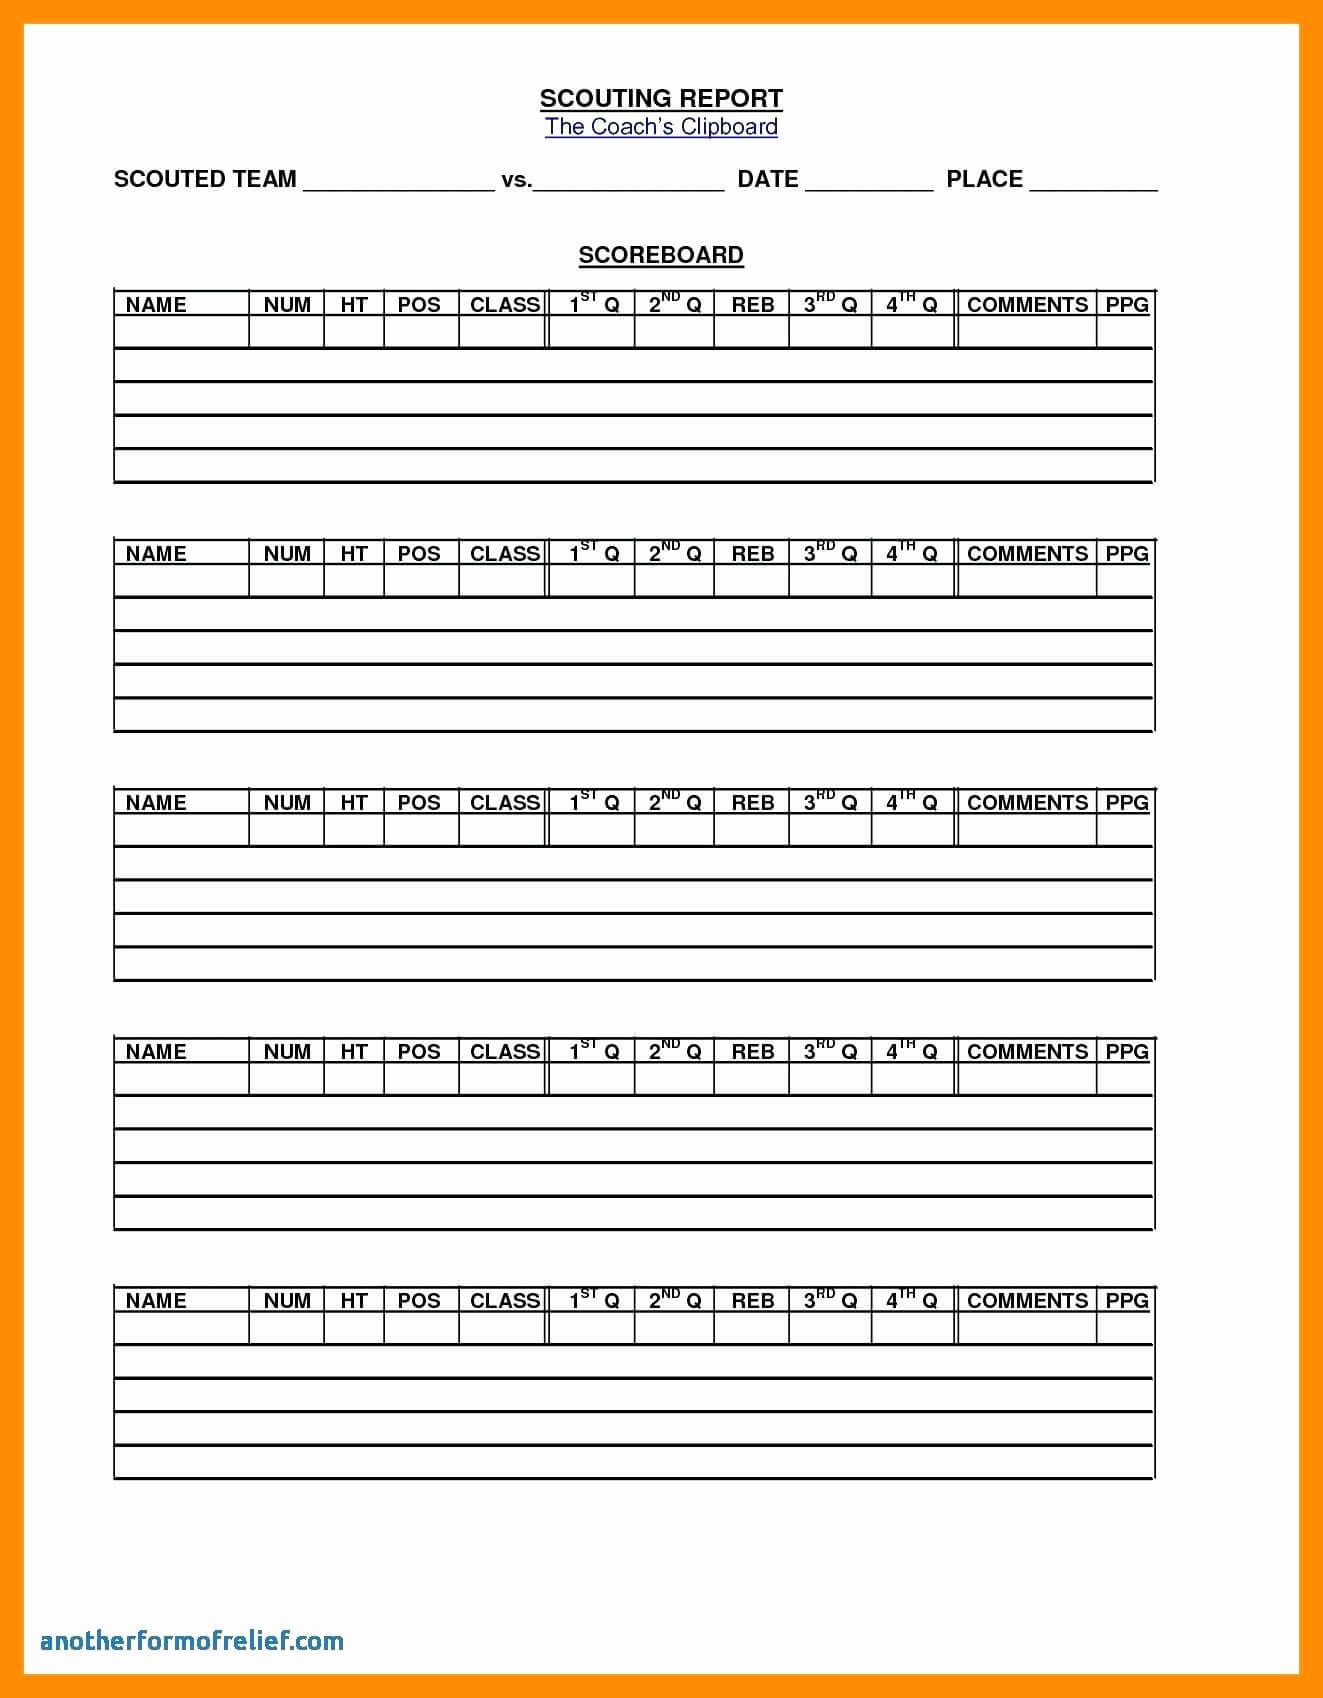 2E6D Basketball Scouting Report Template Sheets In Baseball Scouting Report Template